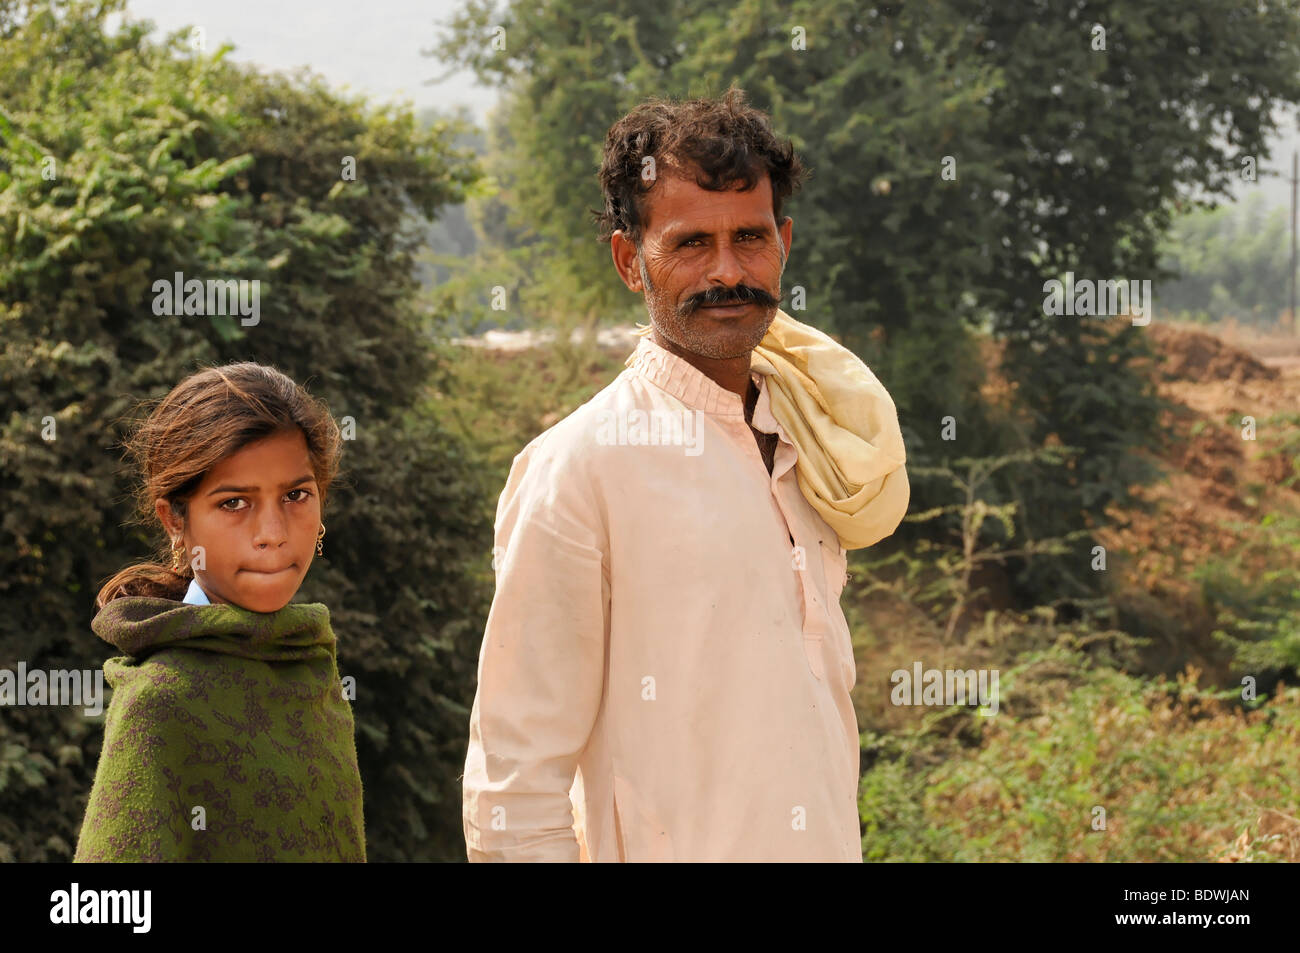 Indian people, father with daughter, near Kota, Rajasthan, northern India, Asia Stock Photo